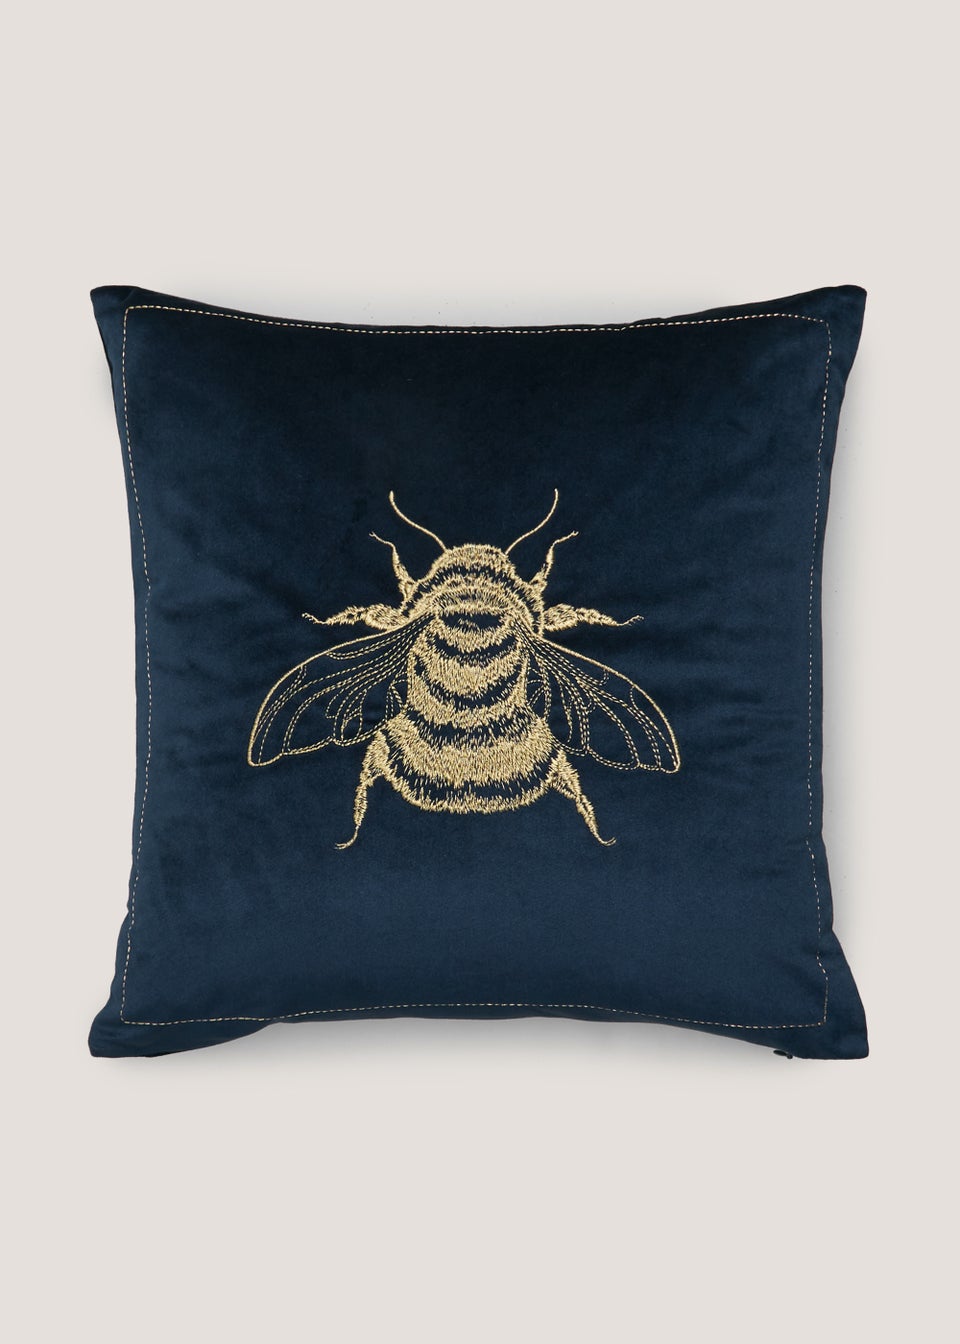 Navy Embroidered Bee Cushion (43cm x 43cm)